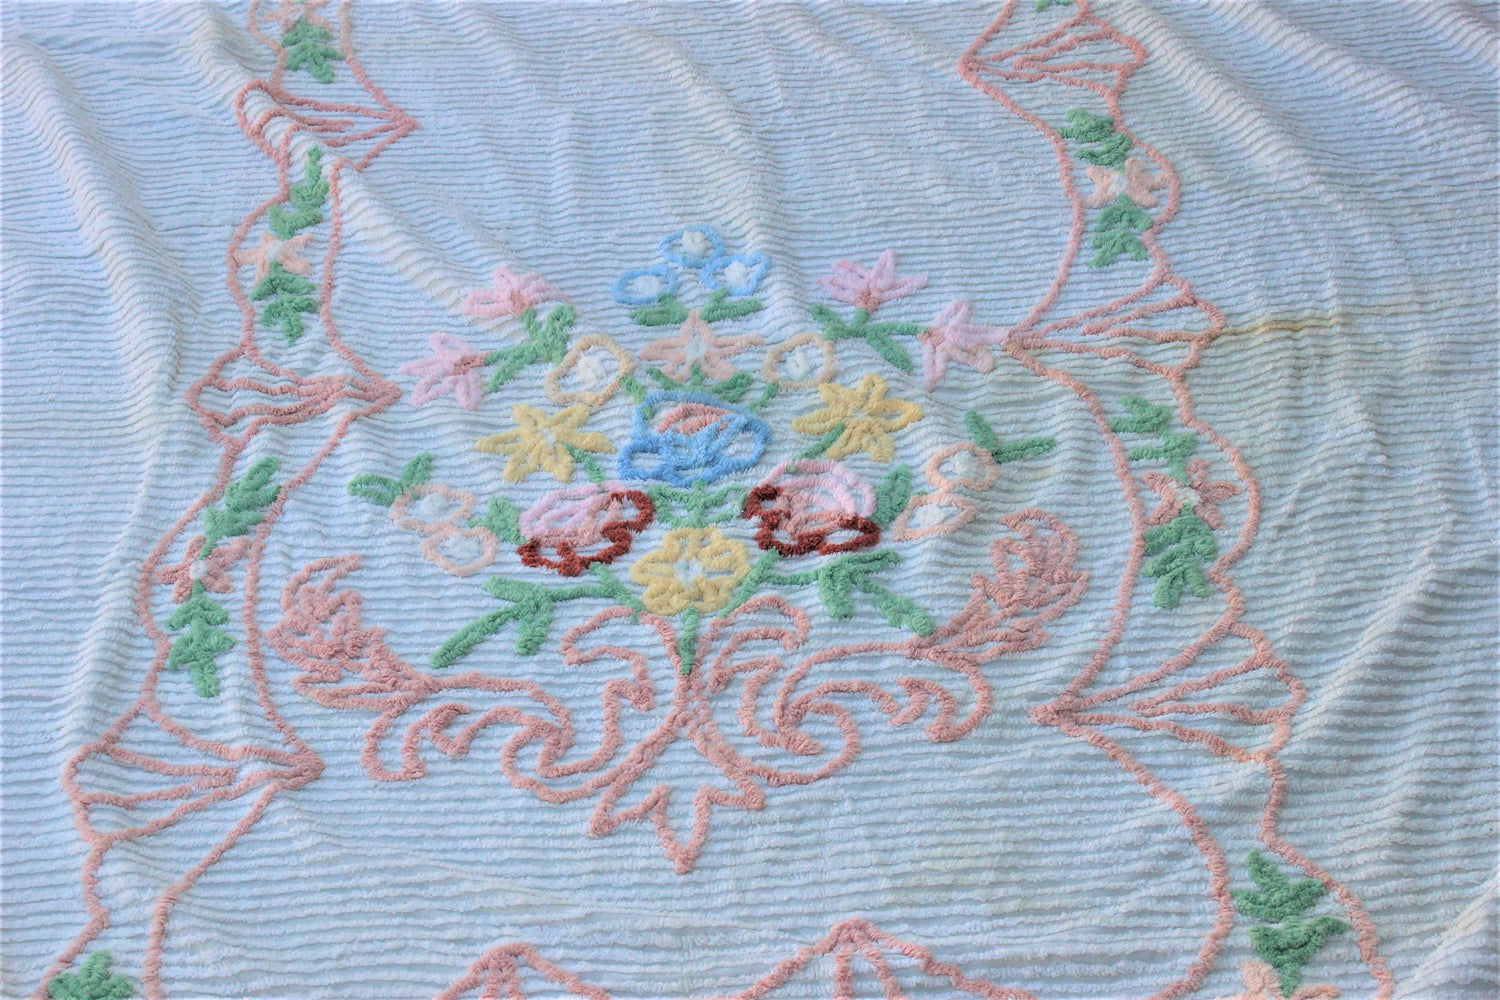 Vintage 1950s Chenille Bedspread Or Blanket, Full Or Queen Size